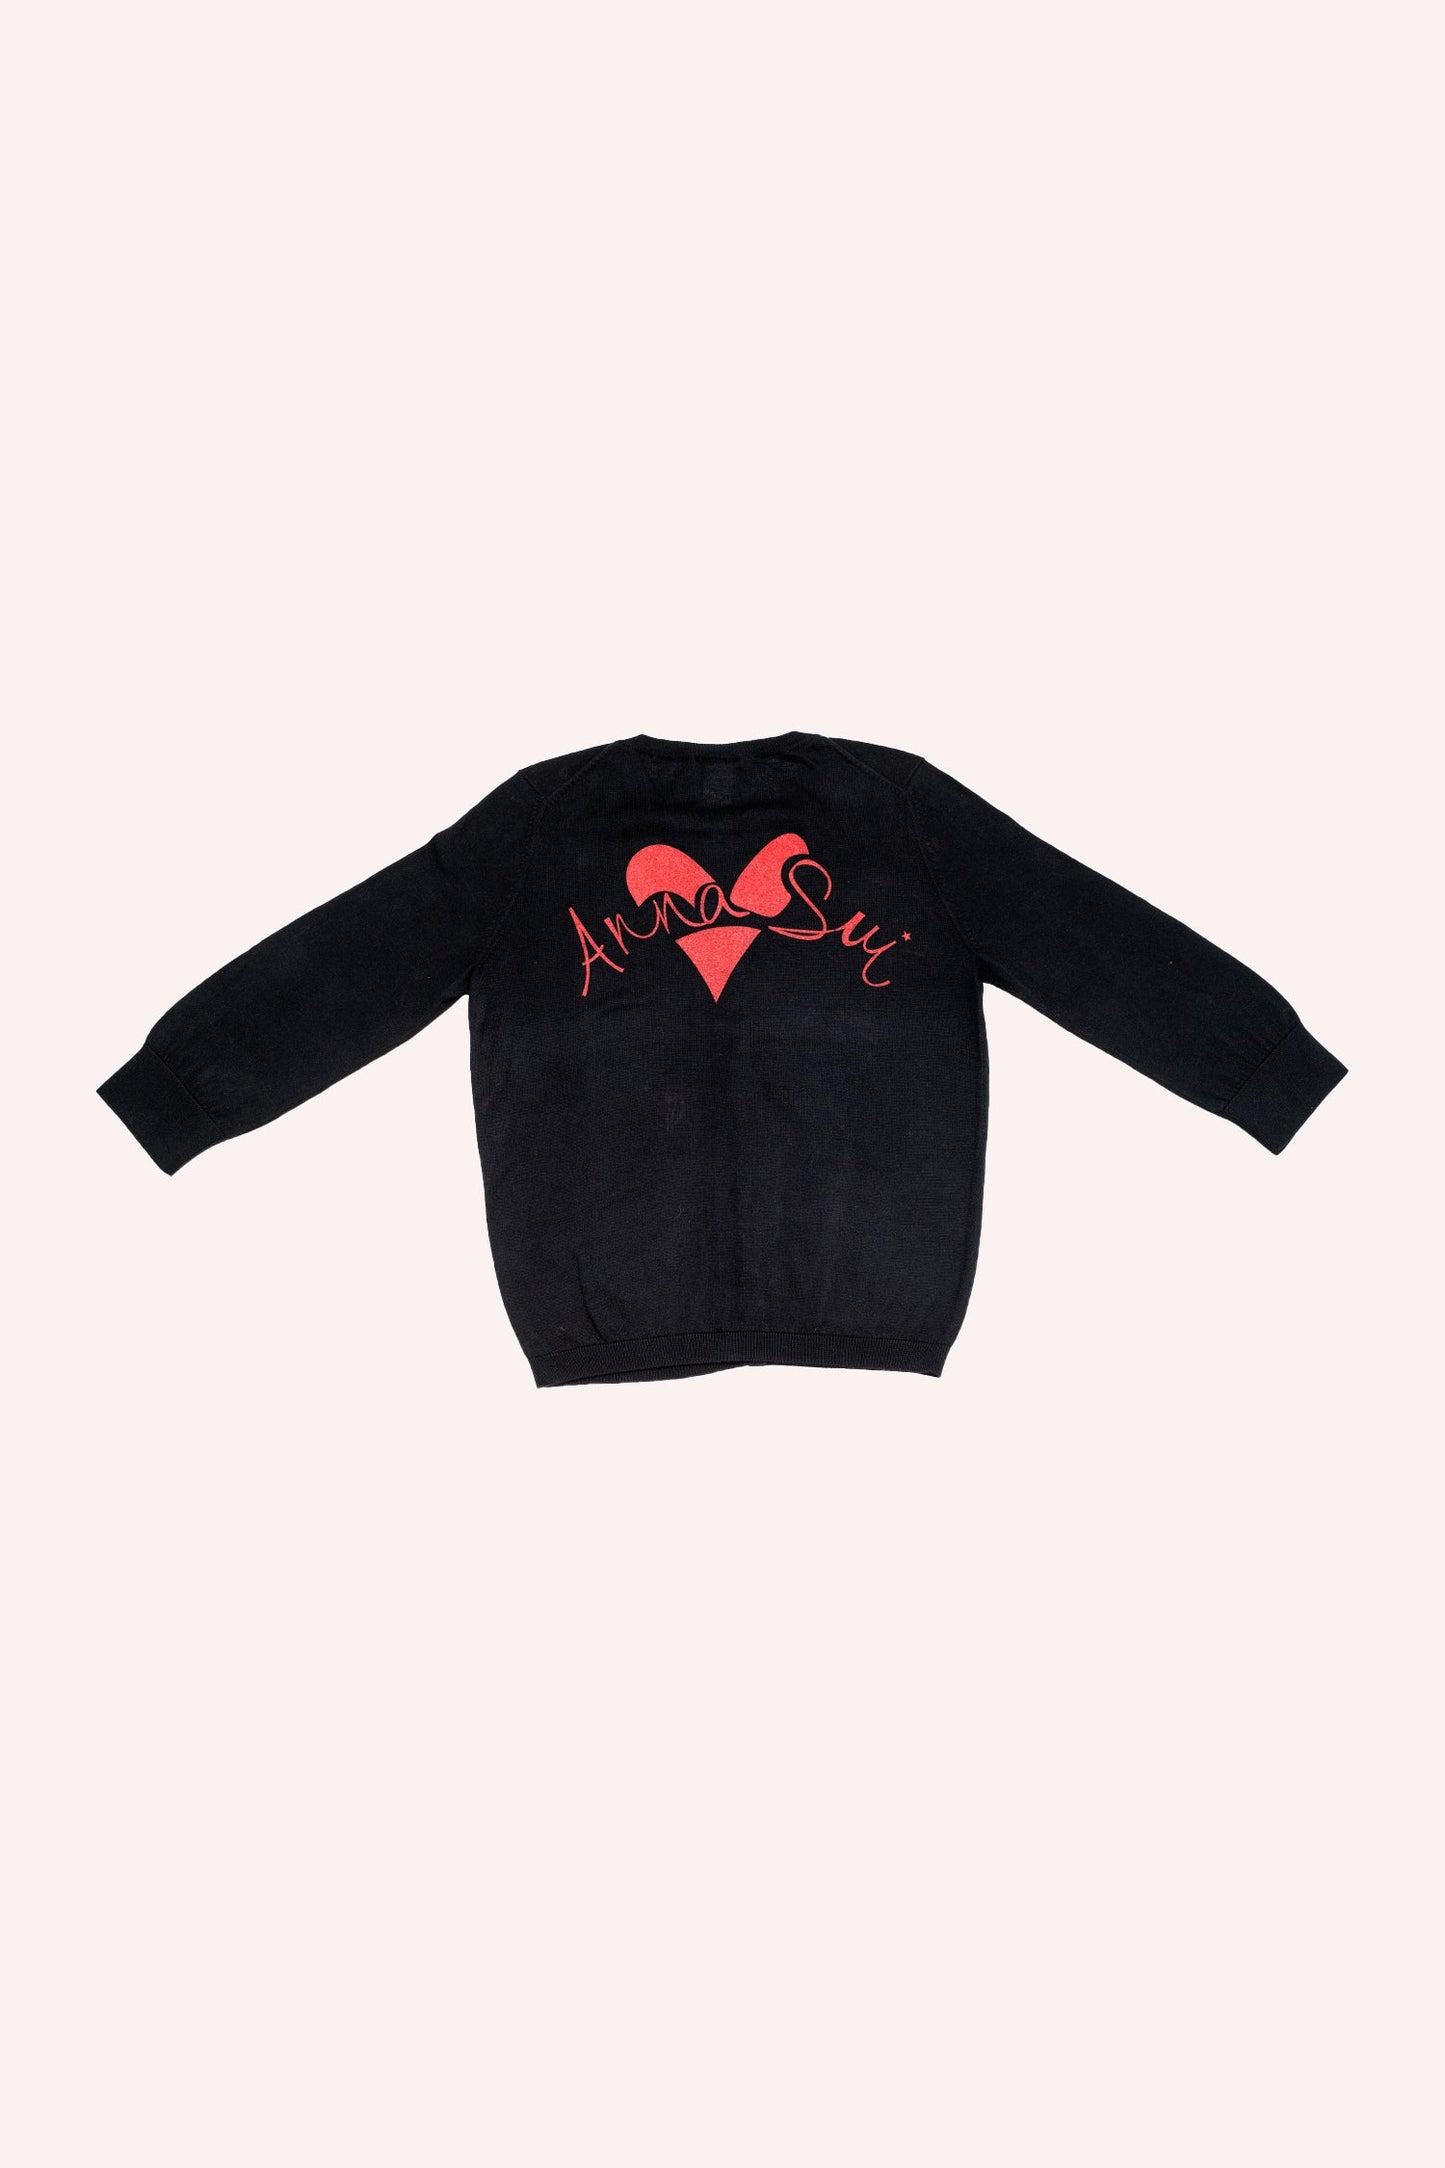 Three-quarter length Cardigan Black, large red Anna Sui over a red hart in middle of the back